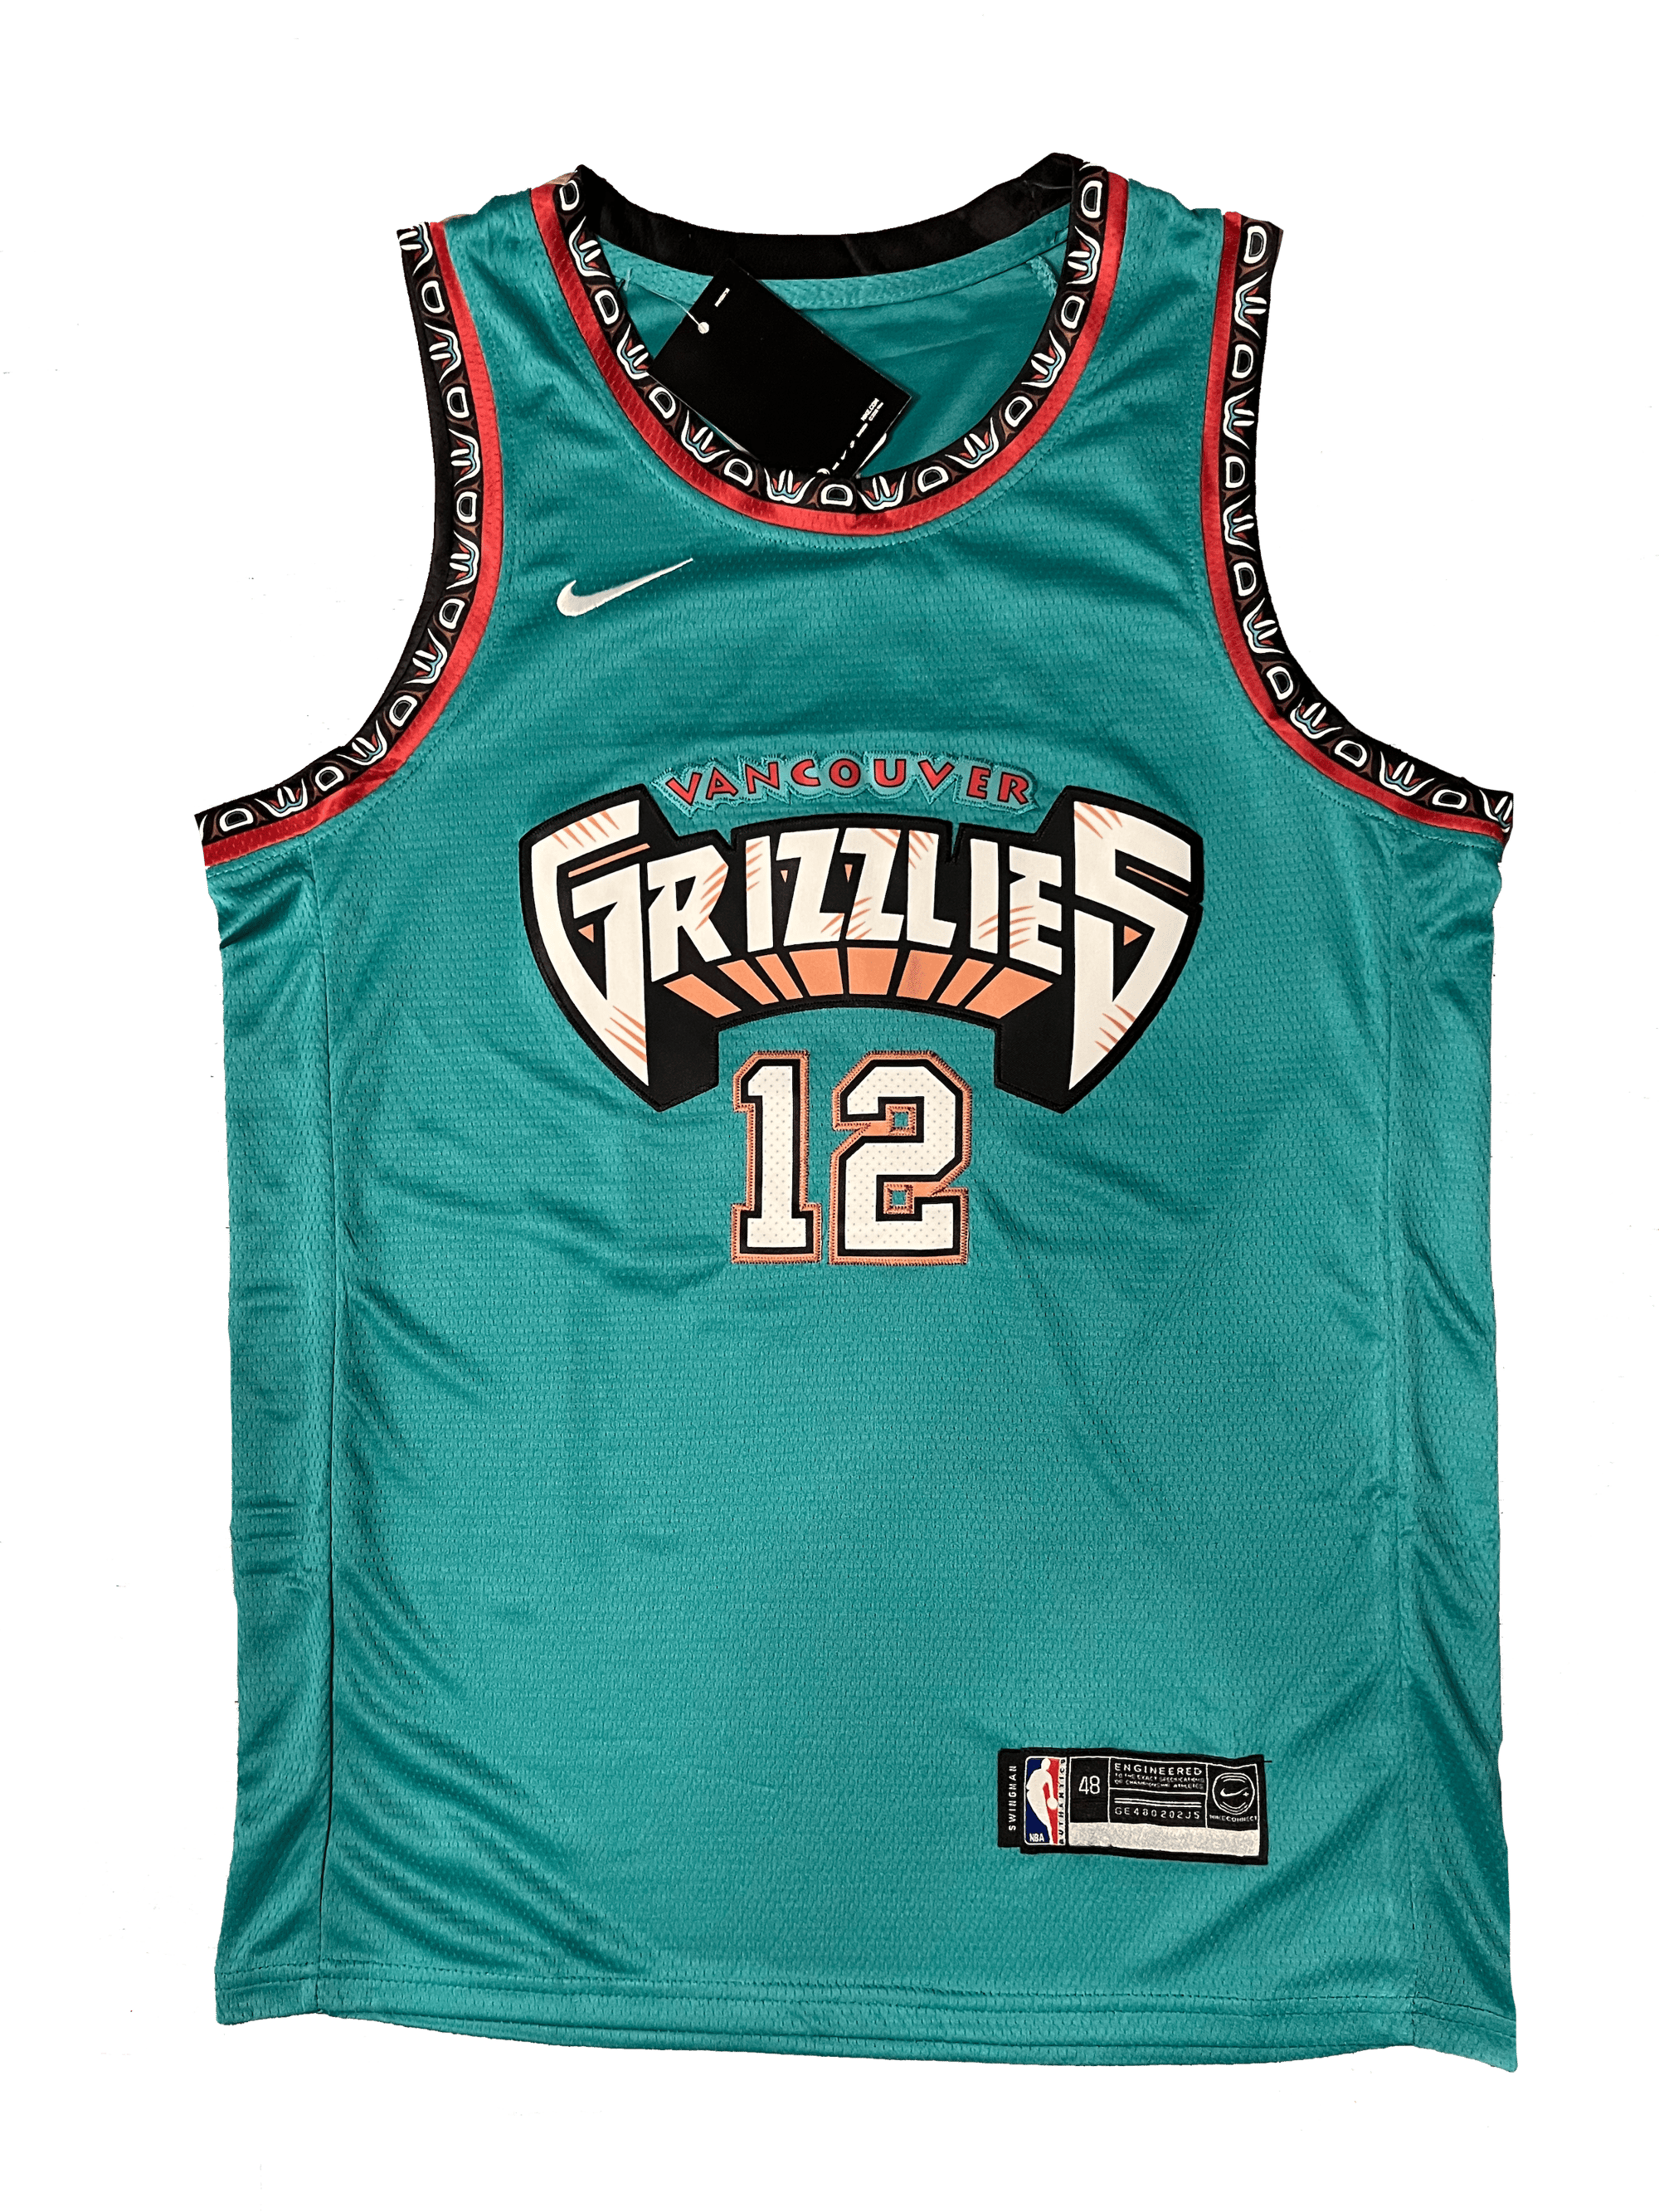 vancouver grizzlies youth jersey